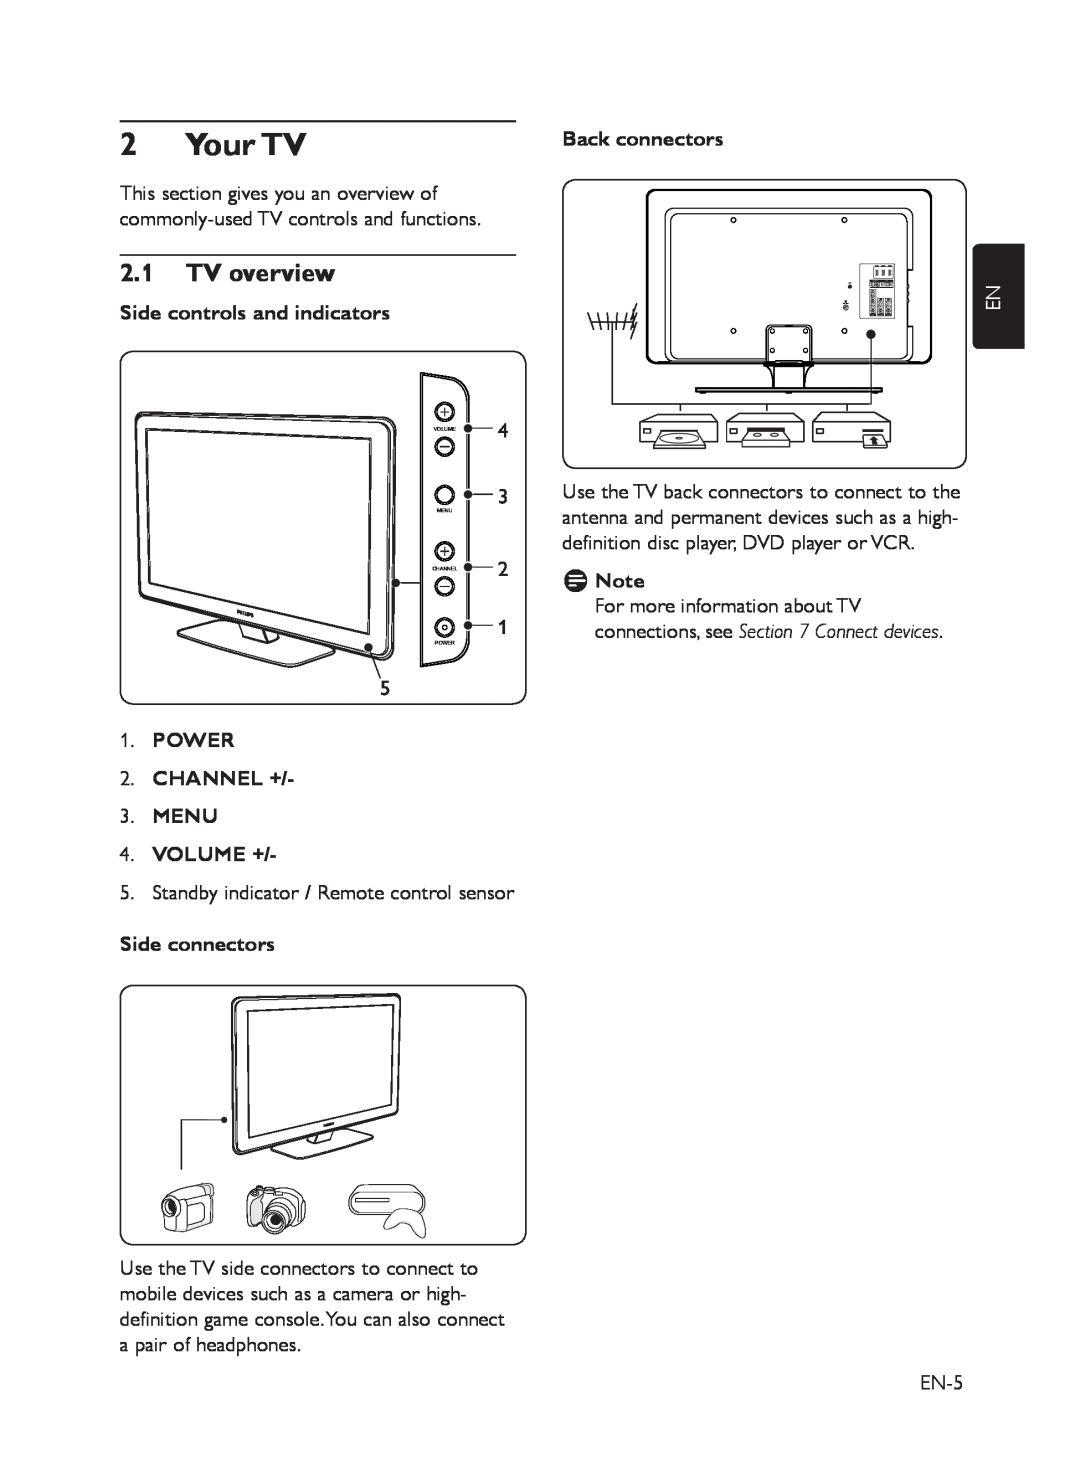 Philips 52PFL7403 Your TV, 2.1TV overview, Side controls and indicators, POWER 2.CHANNEL + 3.MENU 4.VOLUME +, DNote 